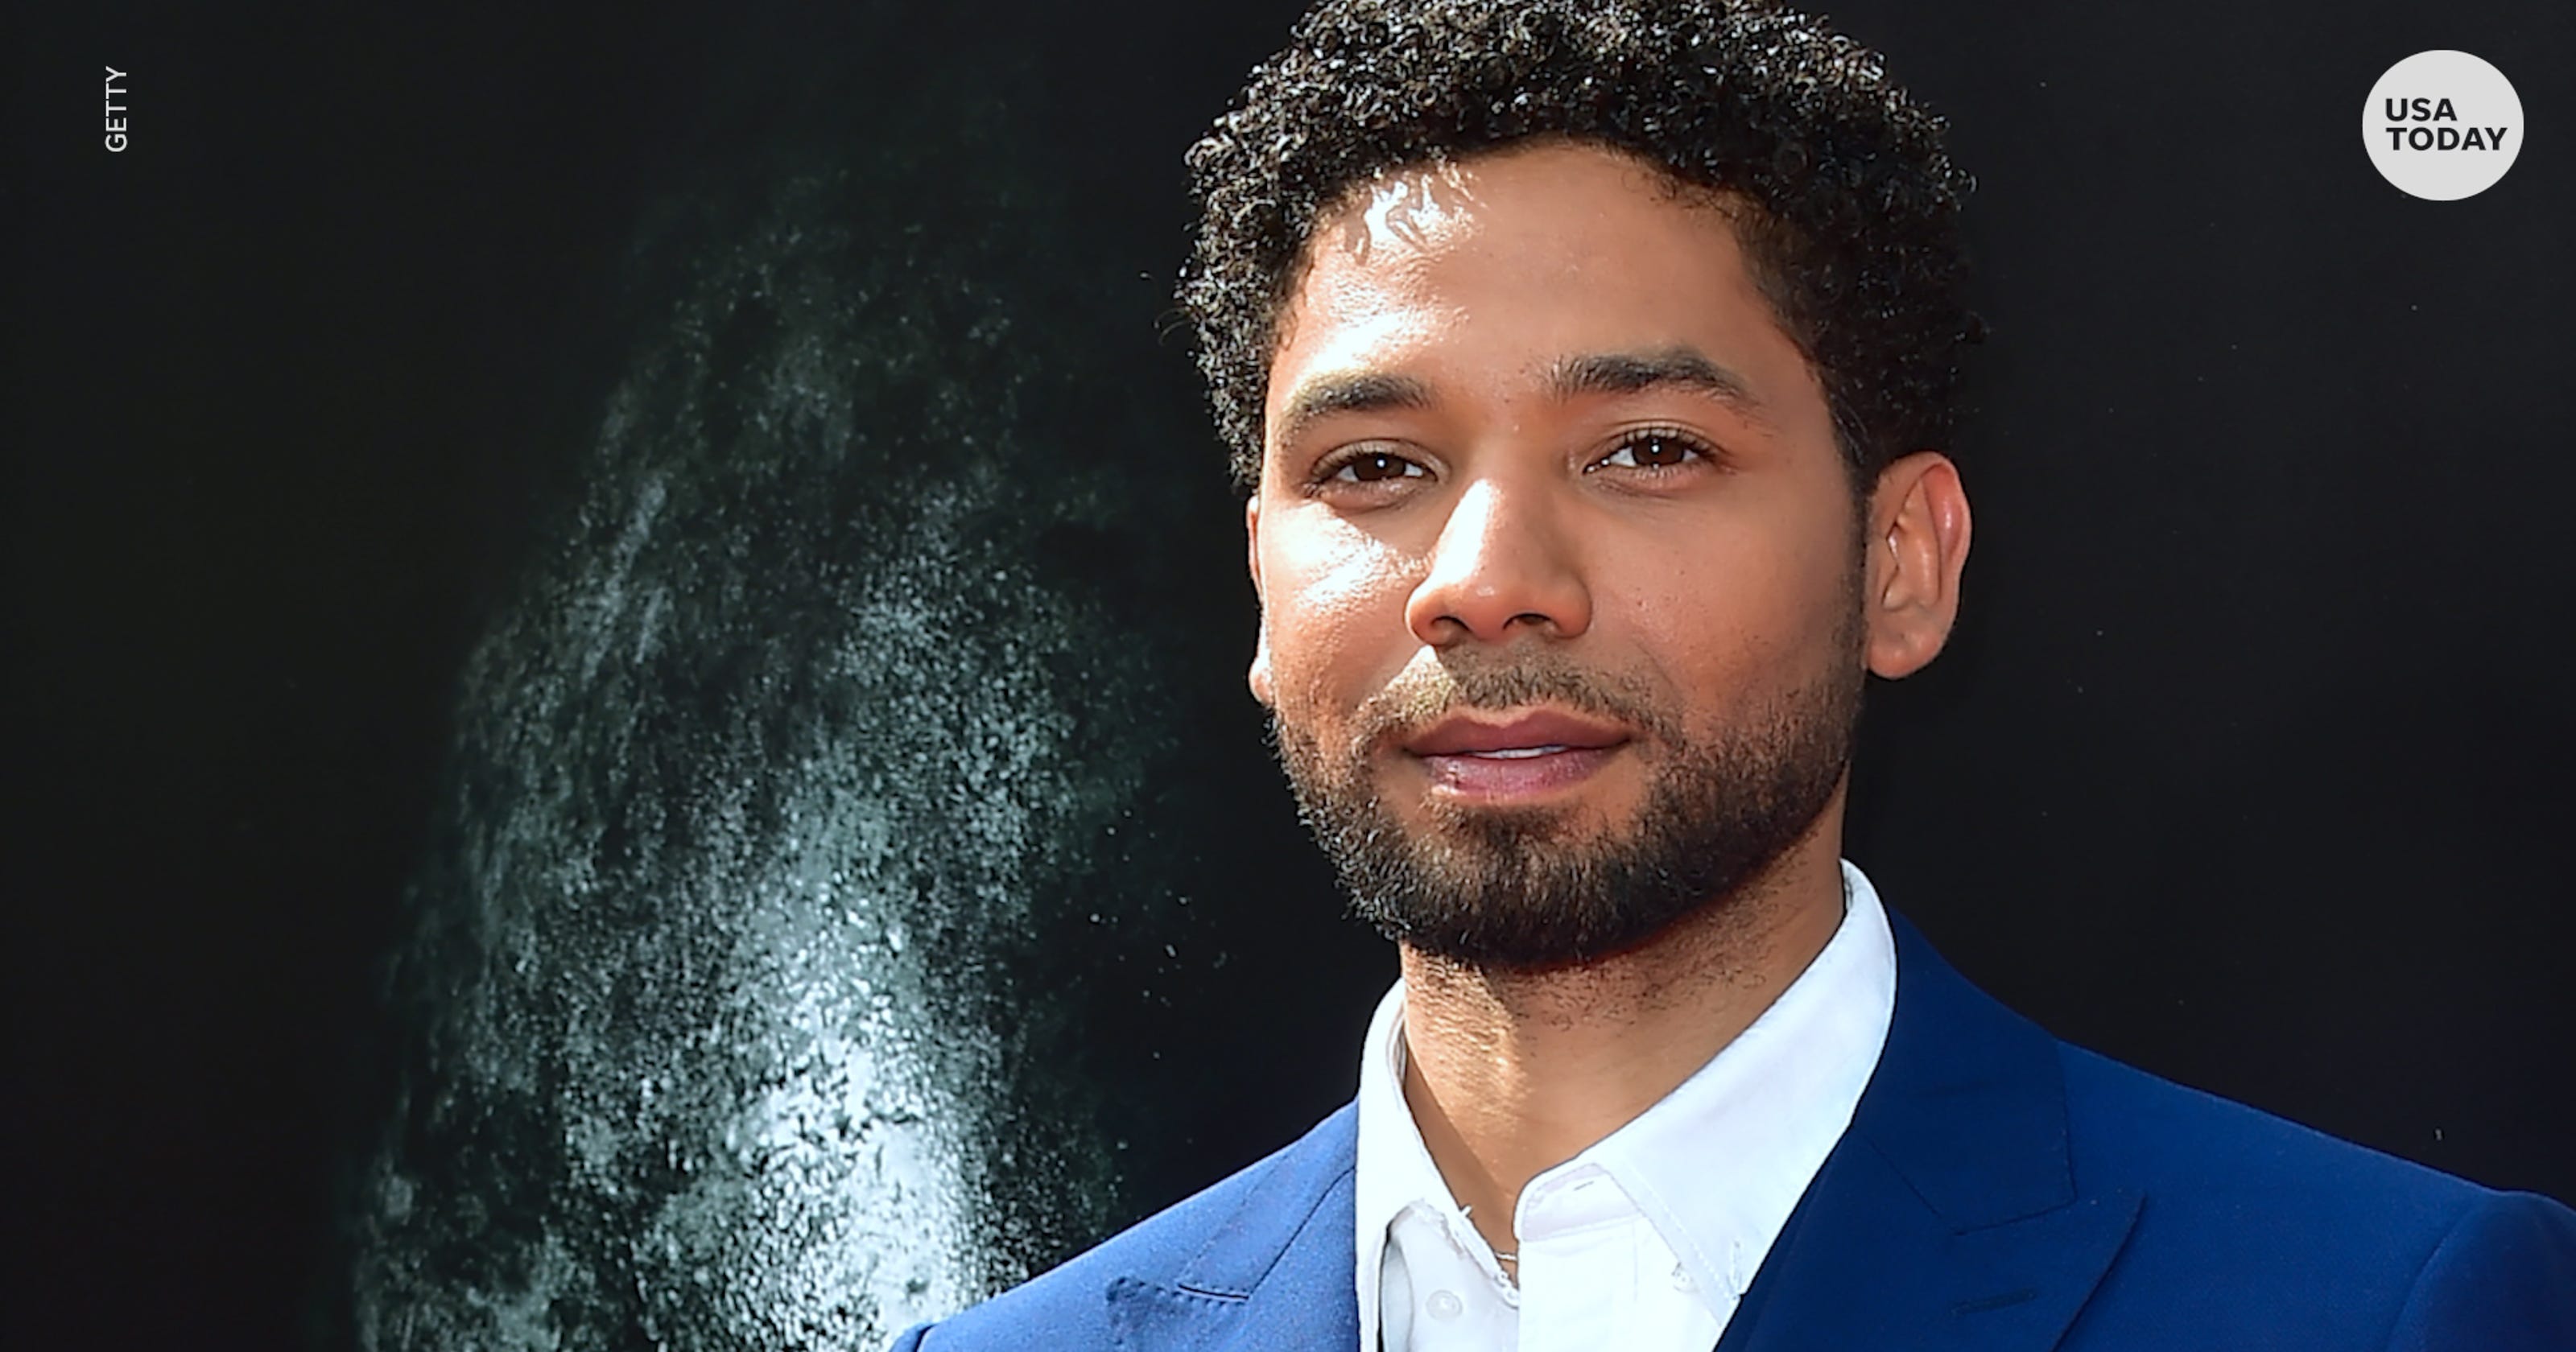 Jussie Smollett case: Brothers tell cops they were paid to stage attack